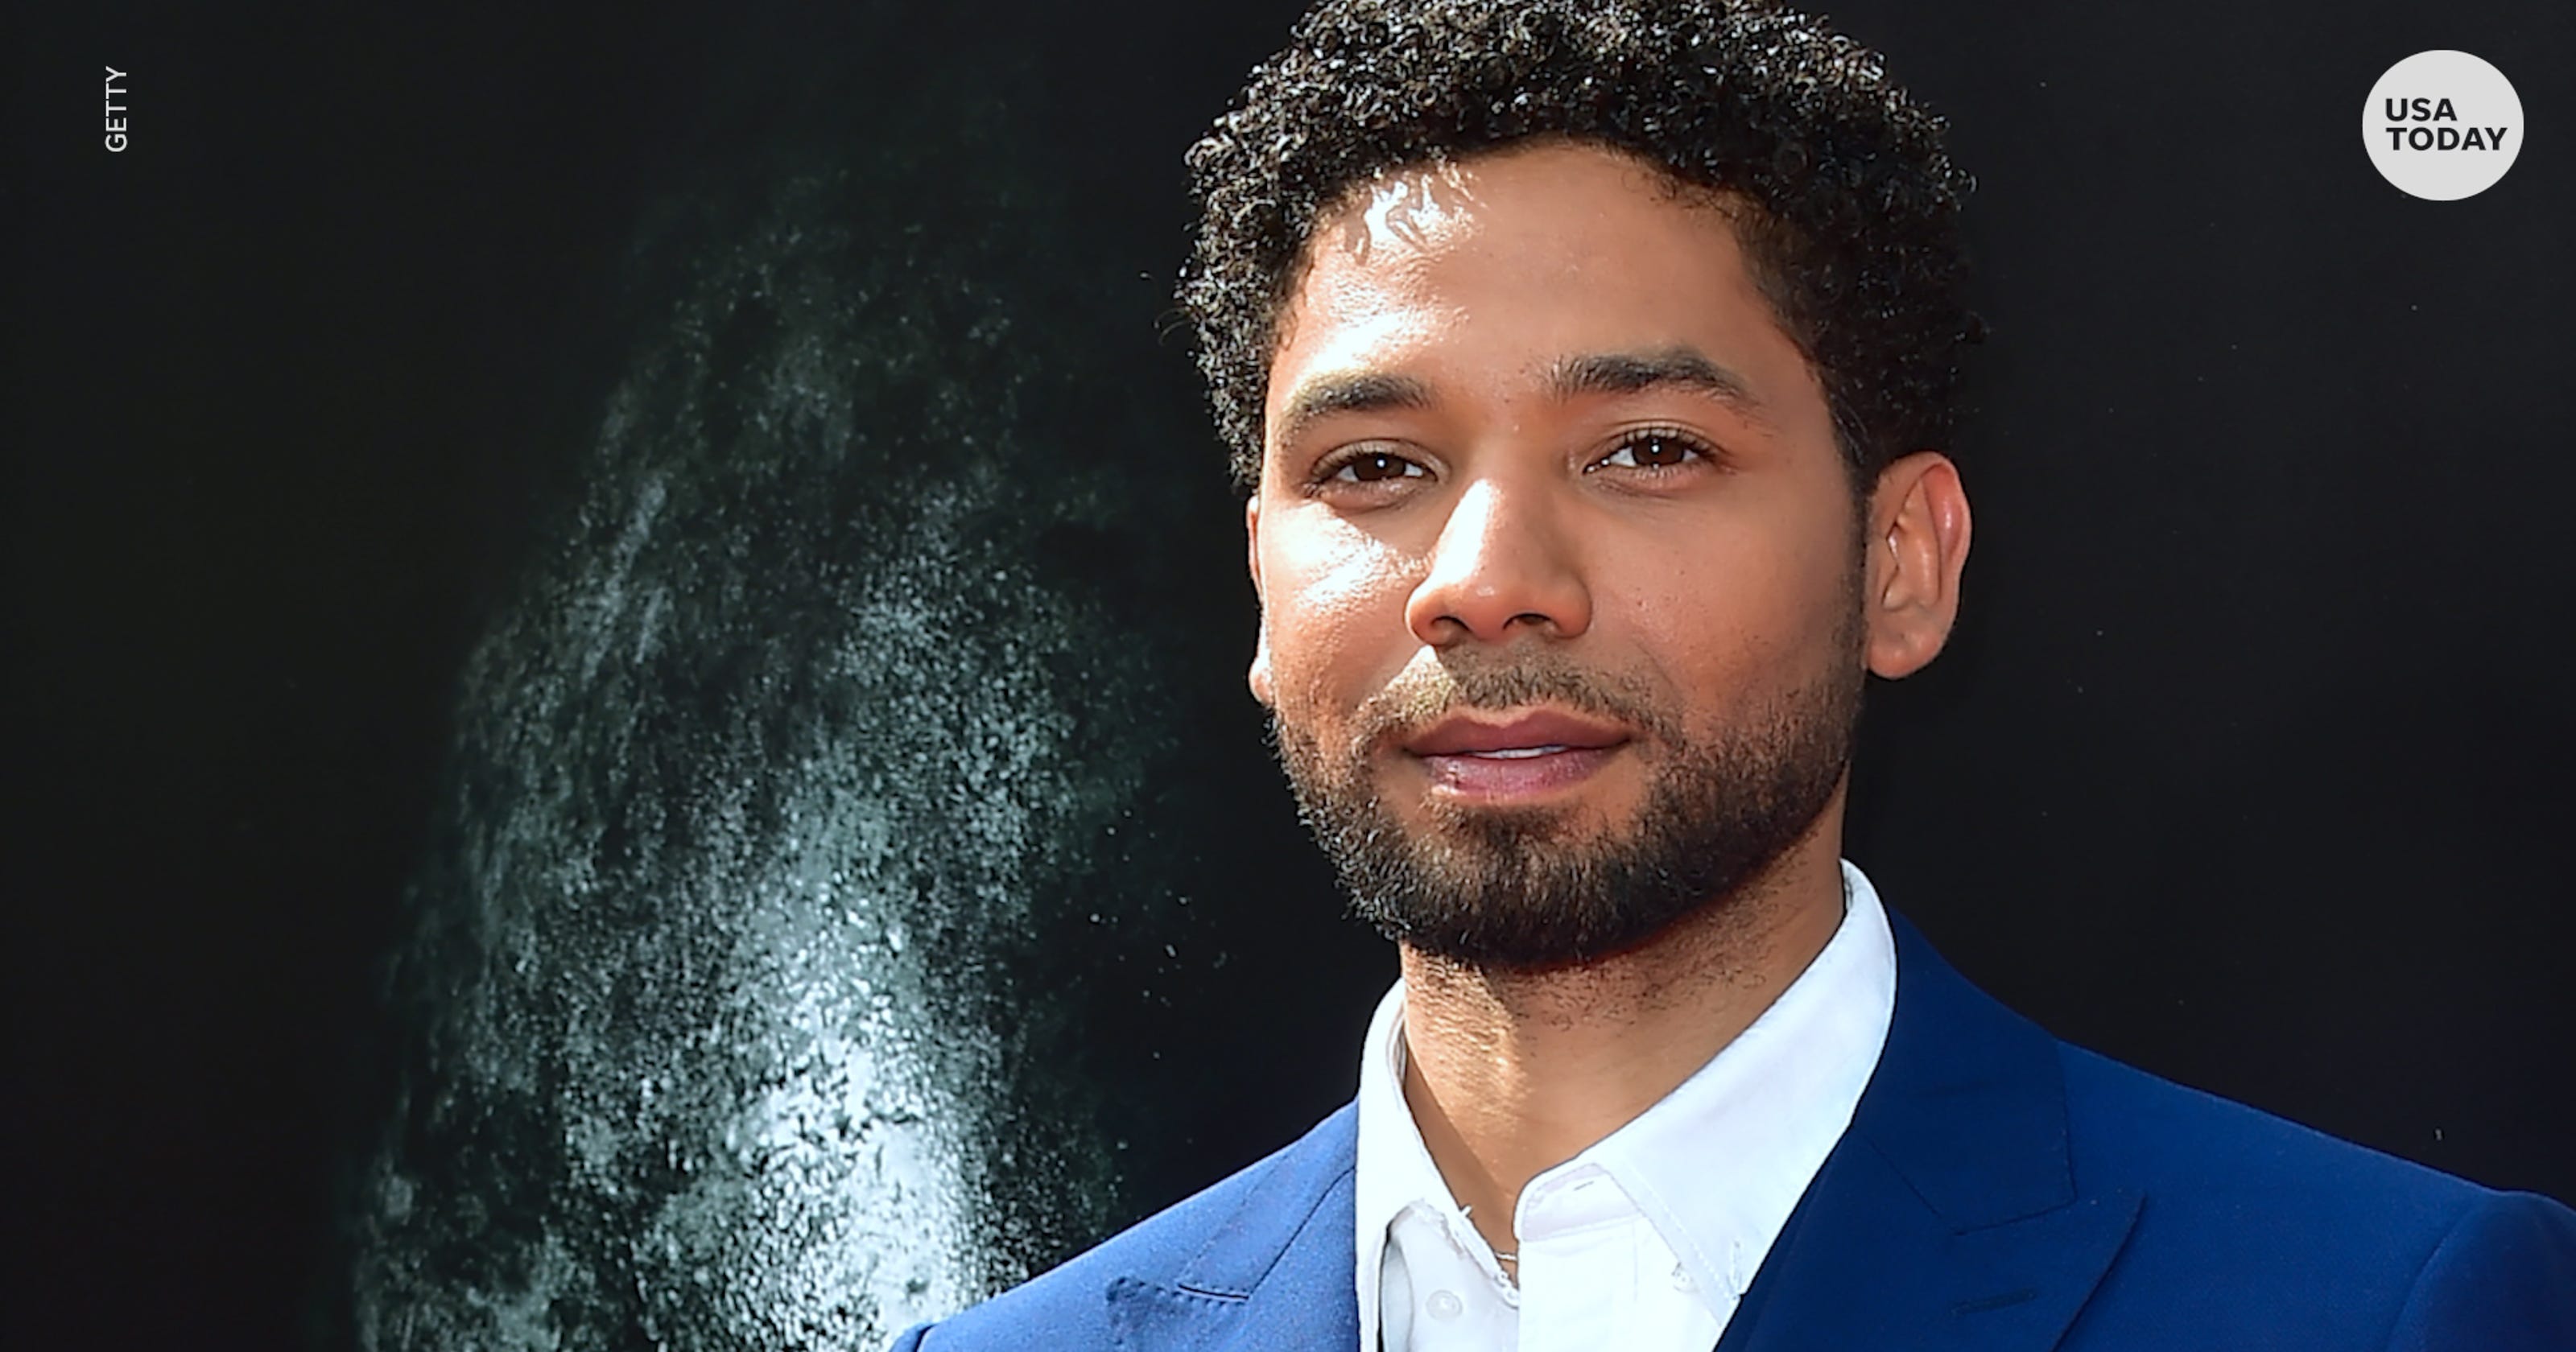 Jussie Smollett case: Brothers tell cops they were paid to stage attack